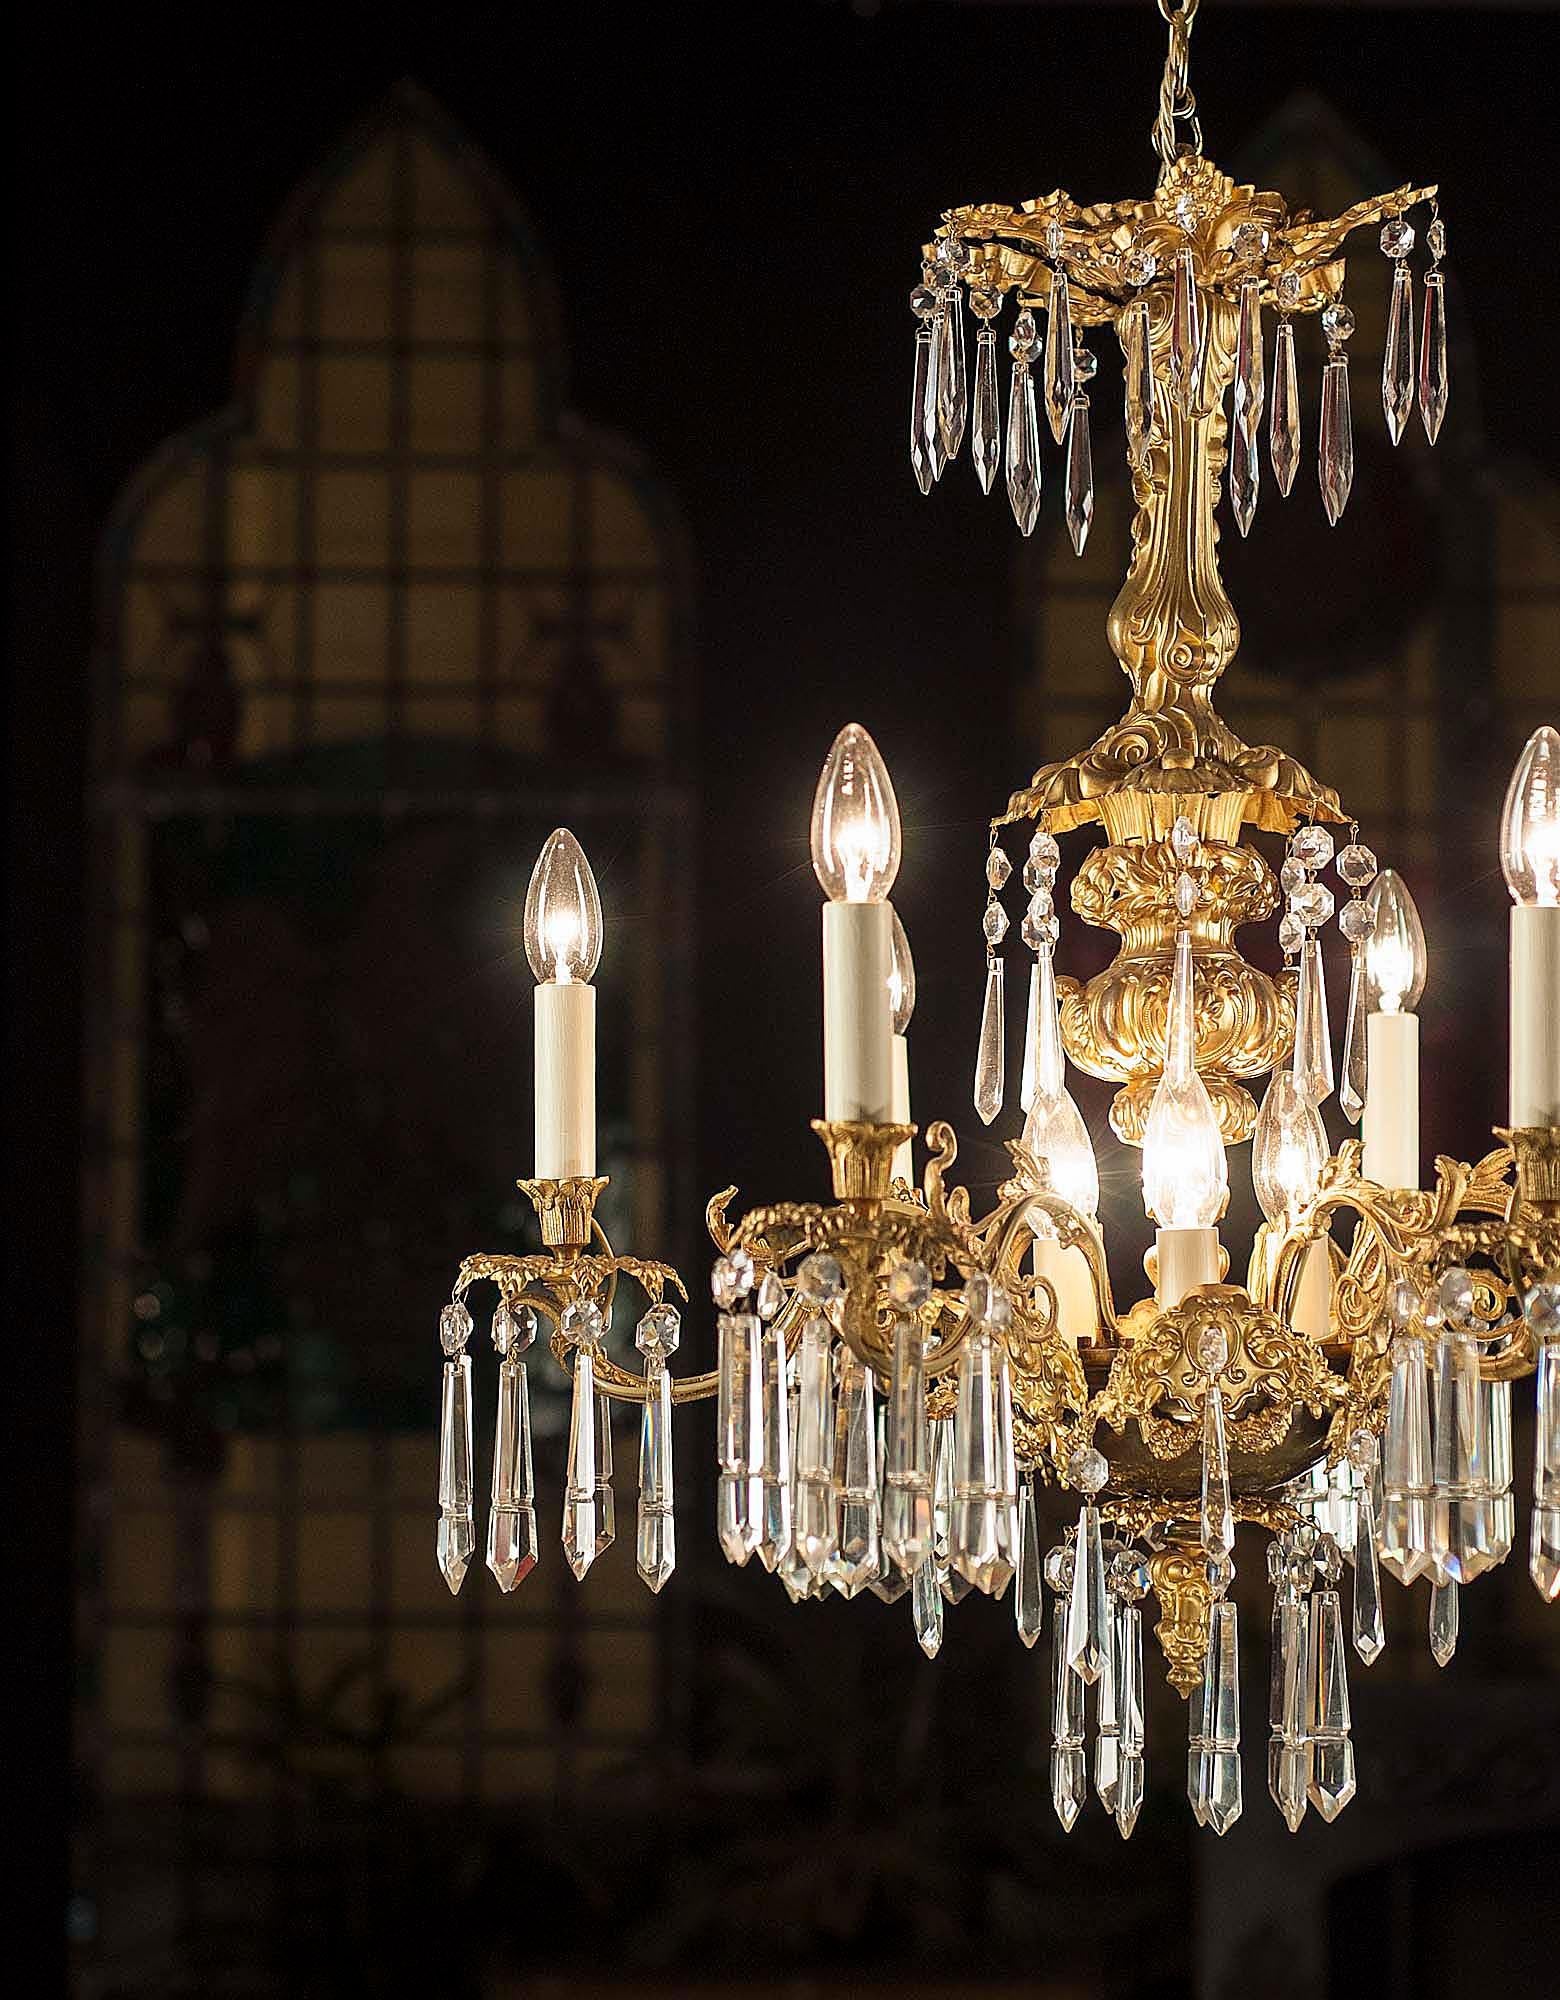 A 19th century Italian style gilt bronze chandelier, hung with six arms, each ensconced with cut crystal prism drops hung from numerous pierced drip trays. Converted to electricity,
mid-19th century.